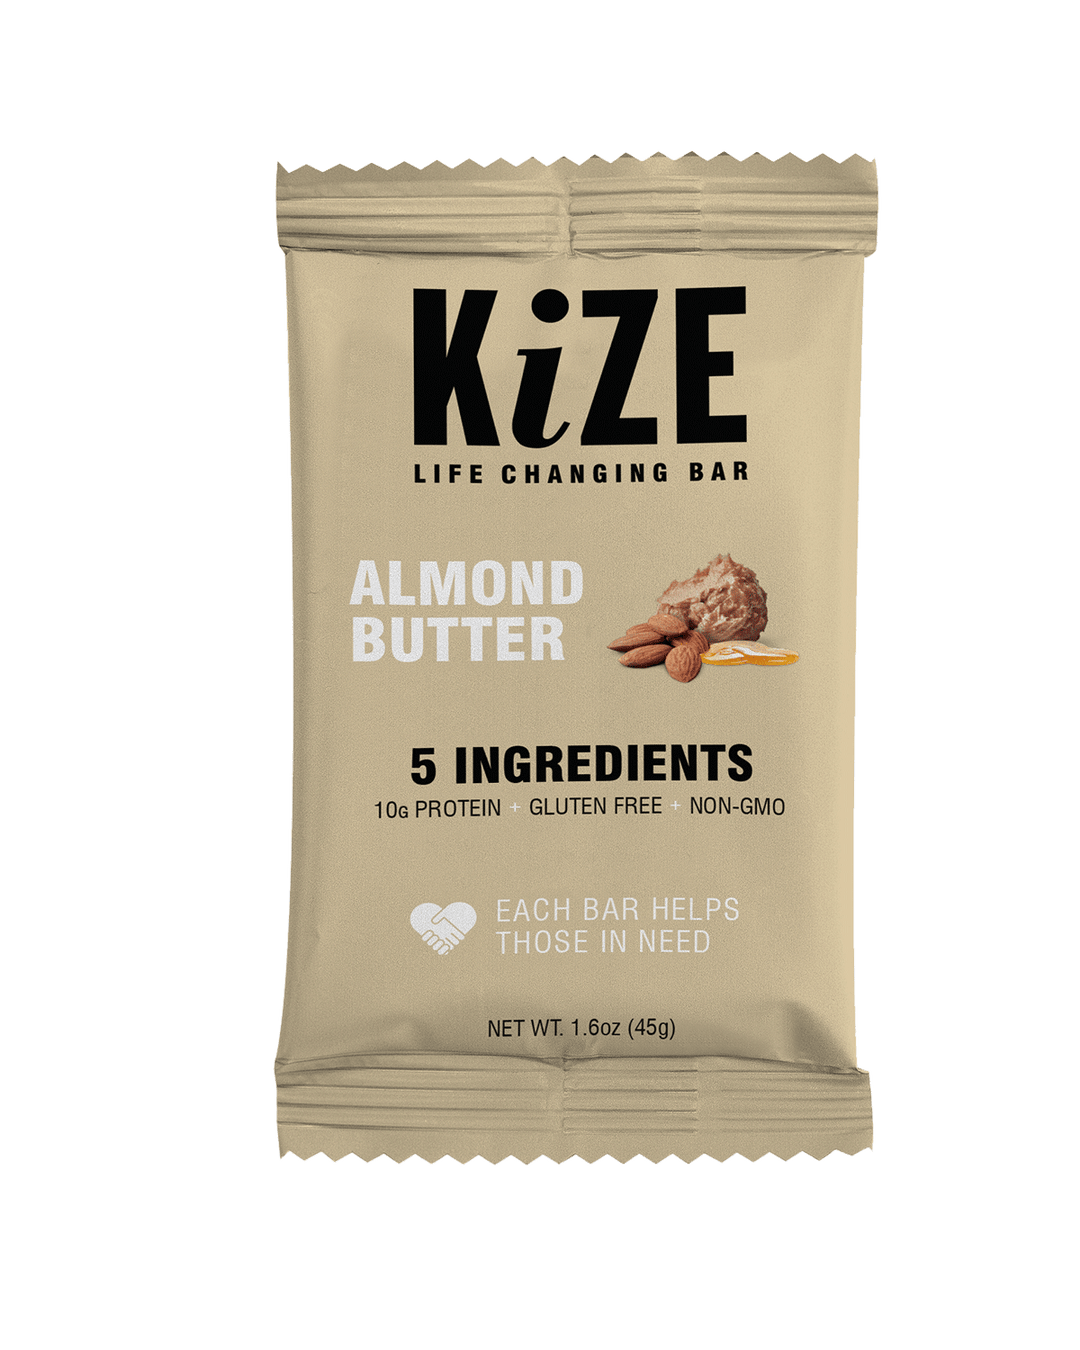 Kize Almond Butter Life Changing Bar 5 Ingredients Protein Gluten-Free Non-GMO